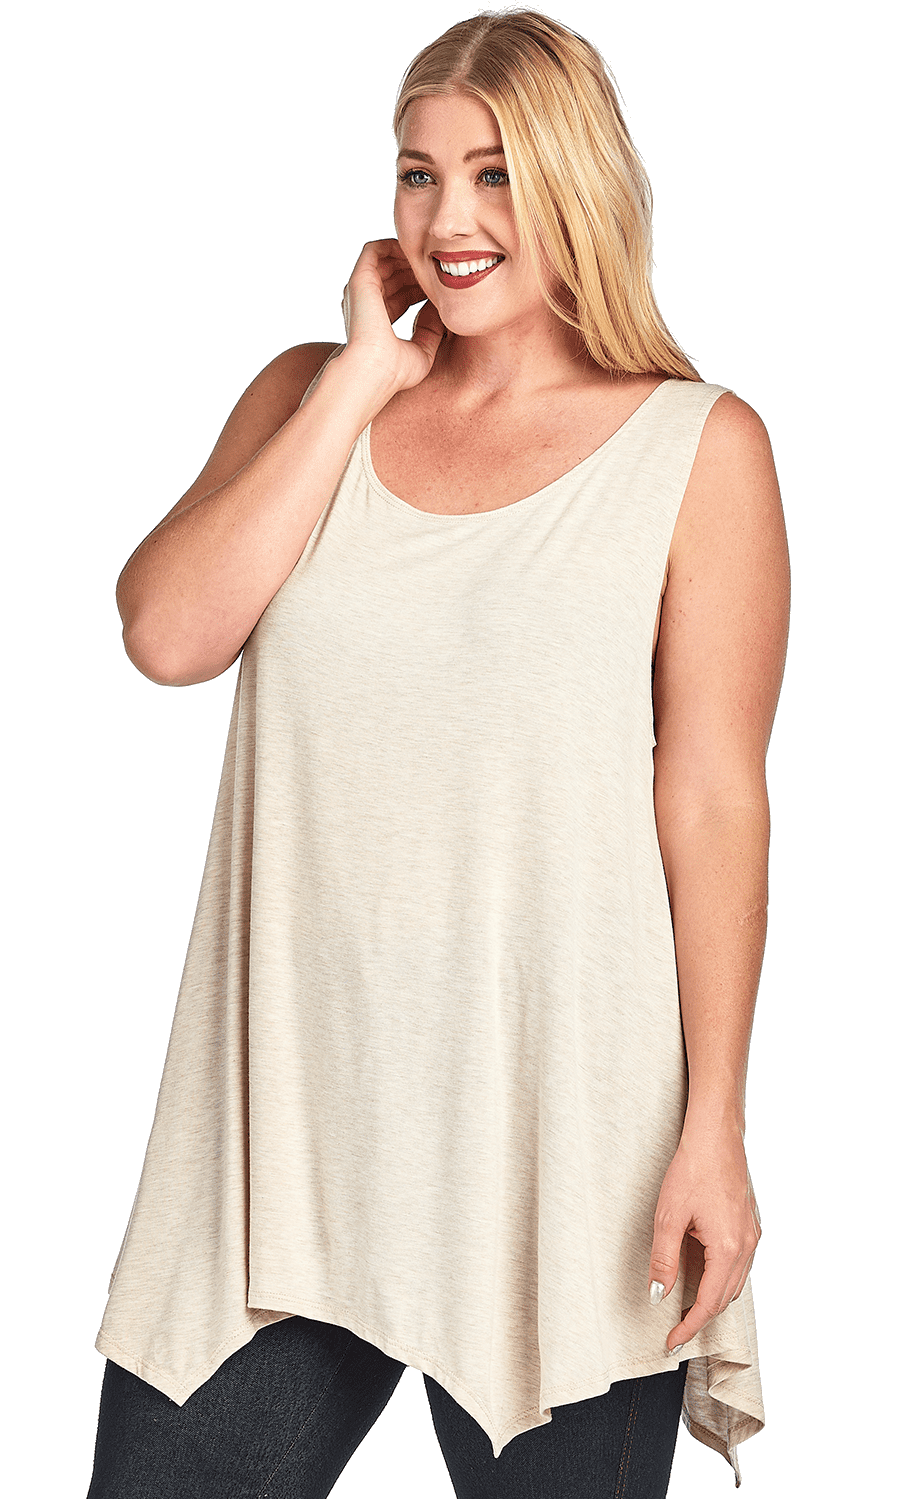 Womens tops made in usa